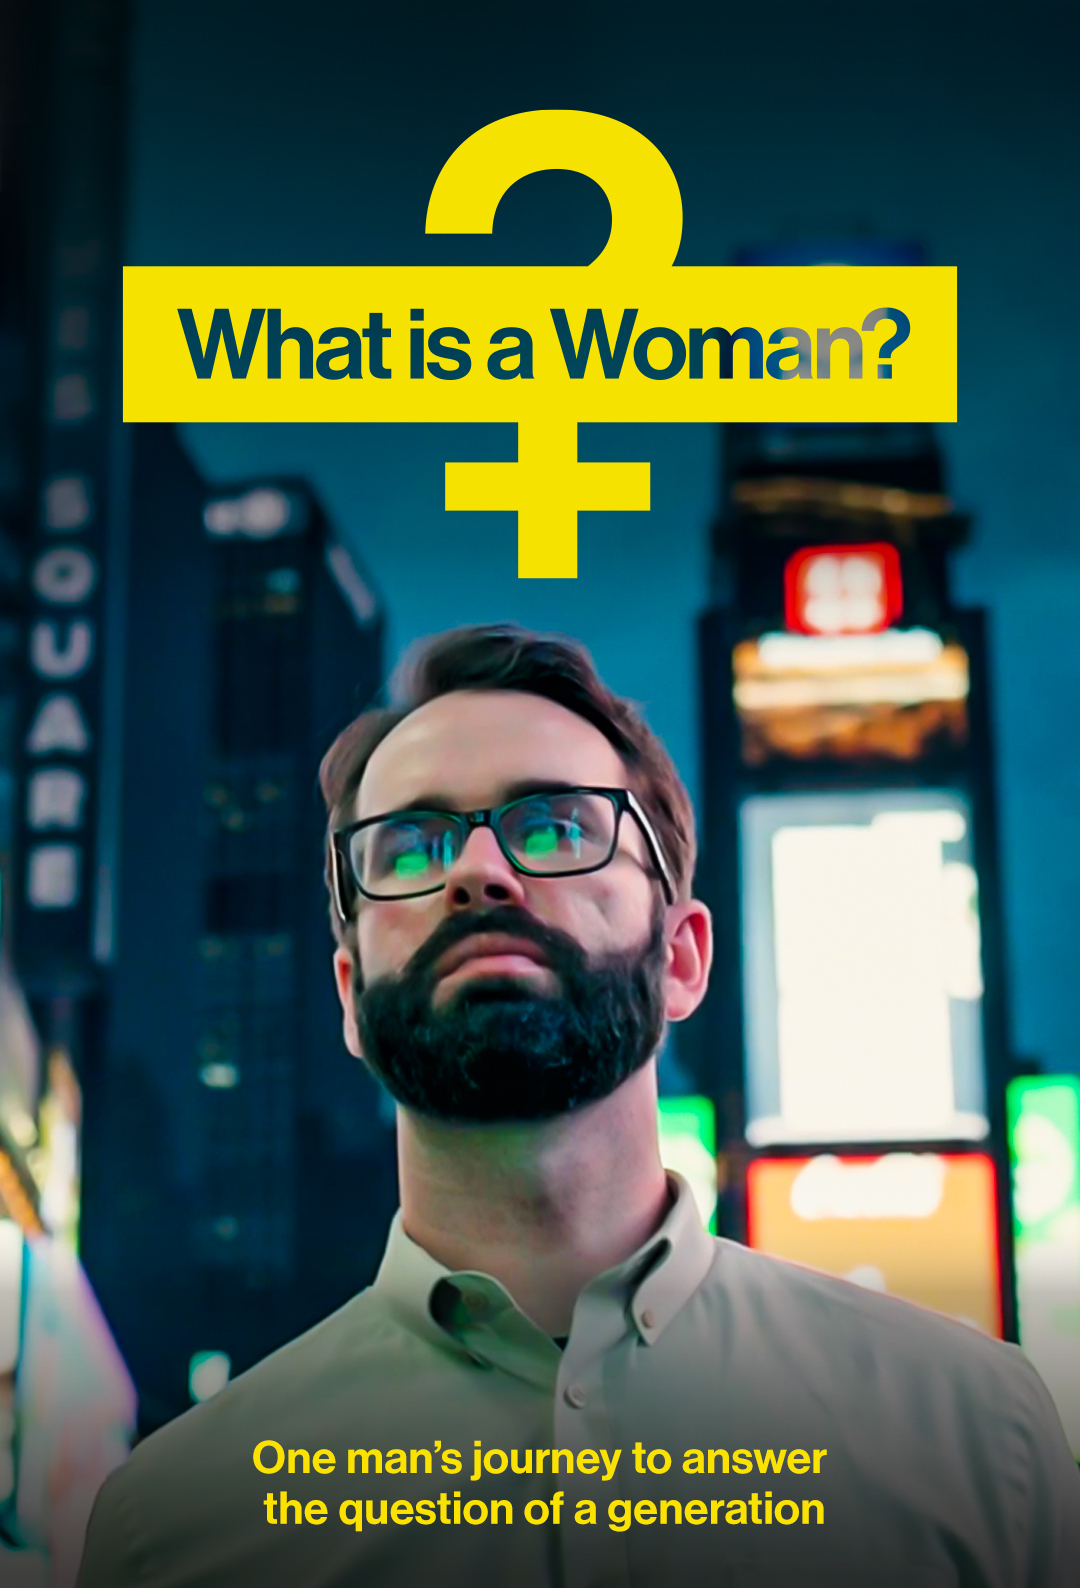 What Is a Woman? (2022) ★★★☆☆